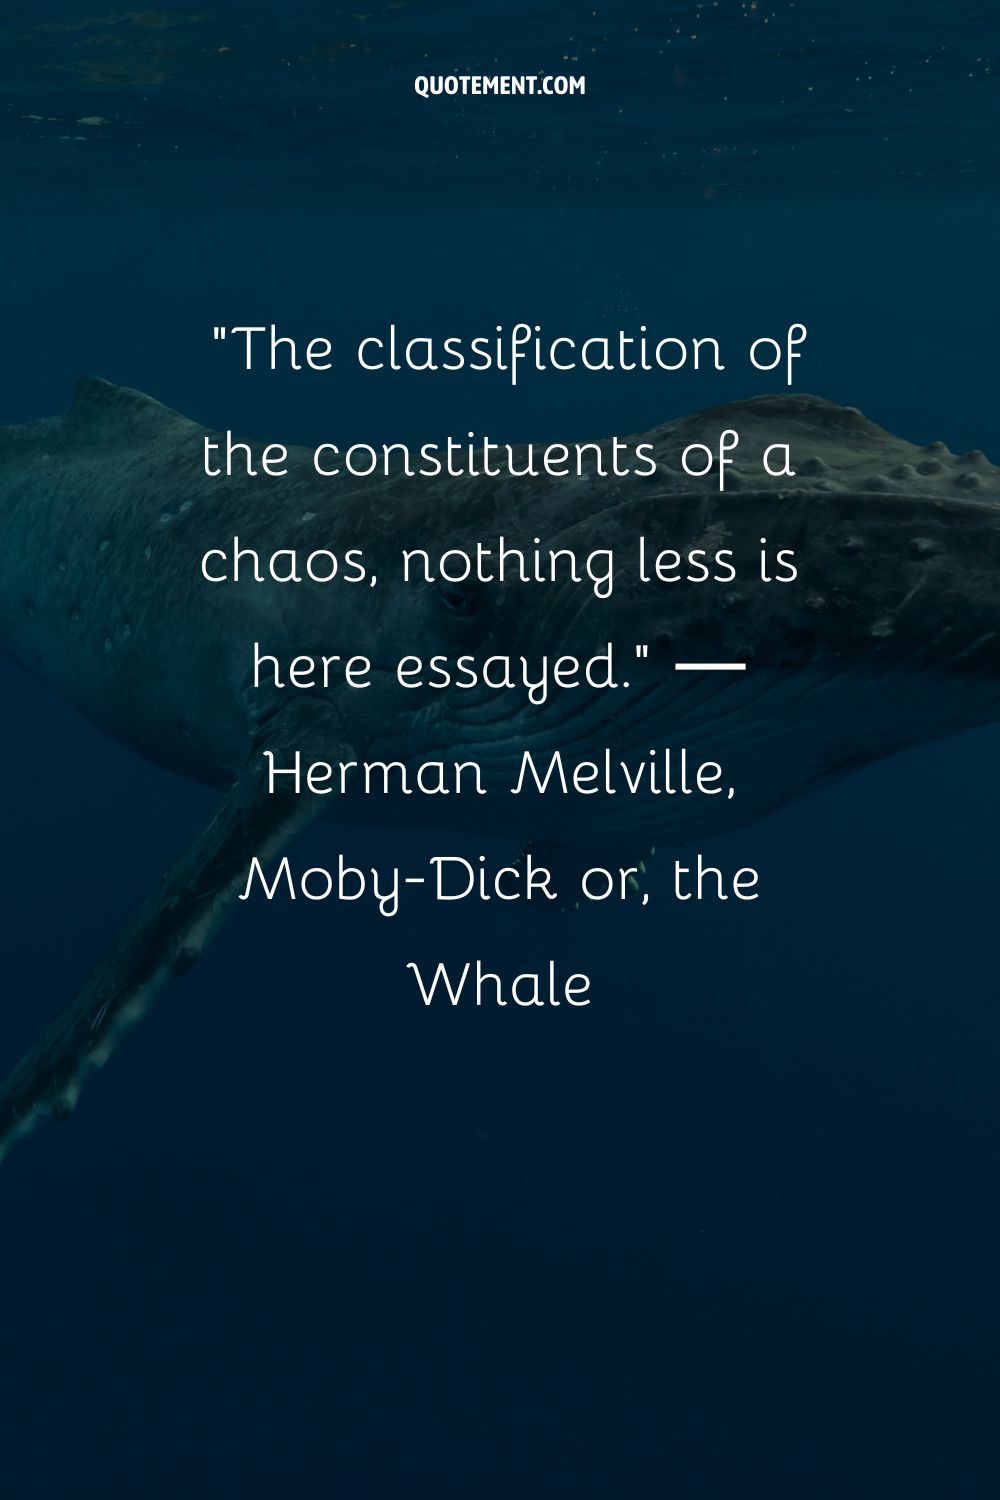 The classification of the constituents of a chaos, nothing less is here essayed.